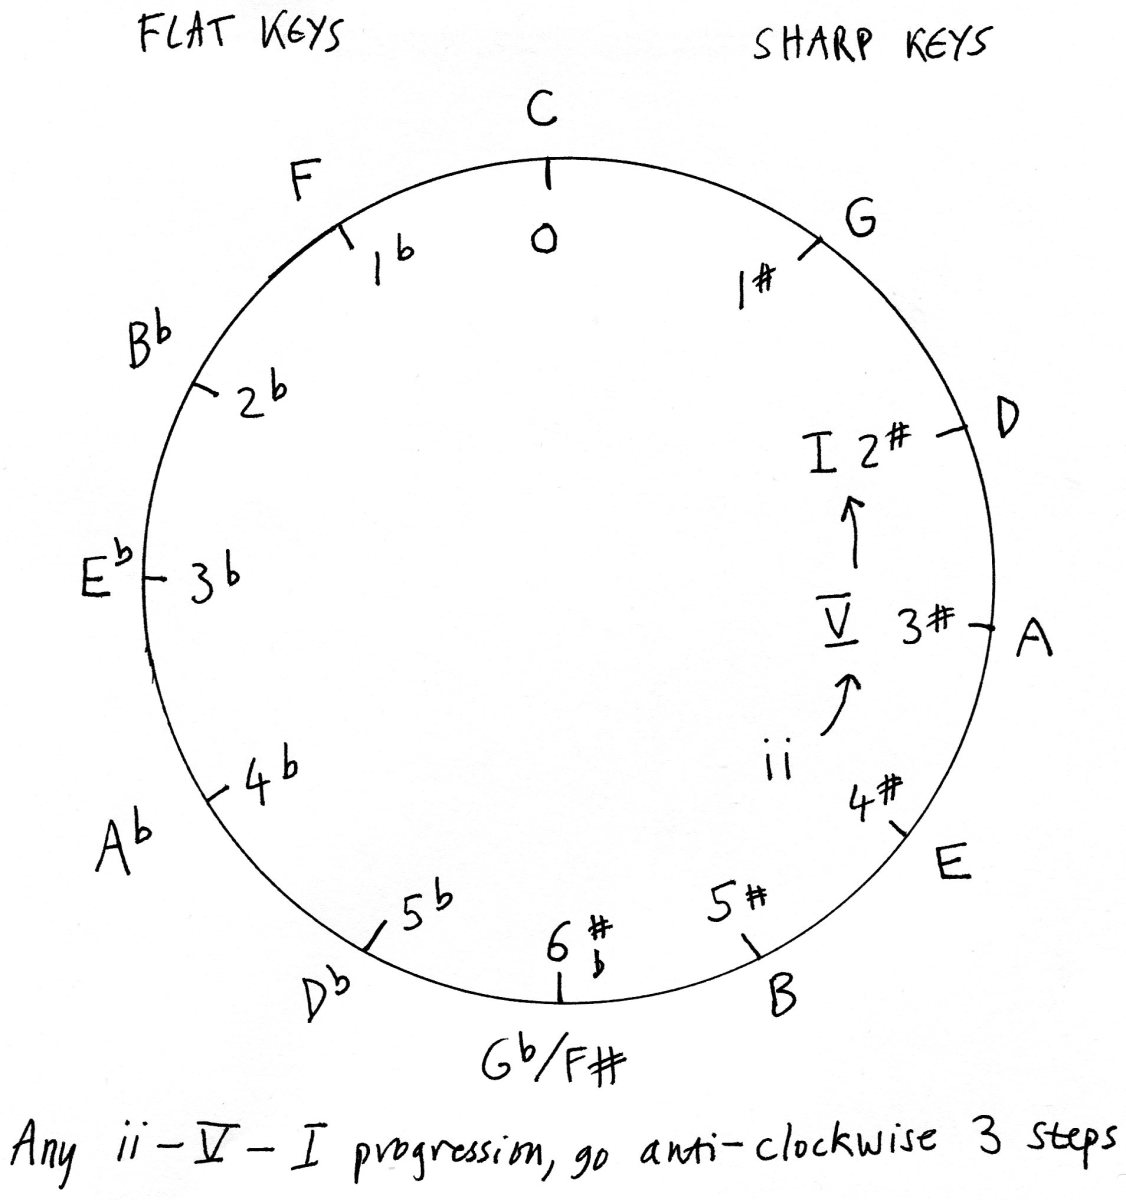 Cycle of Fifths